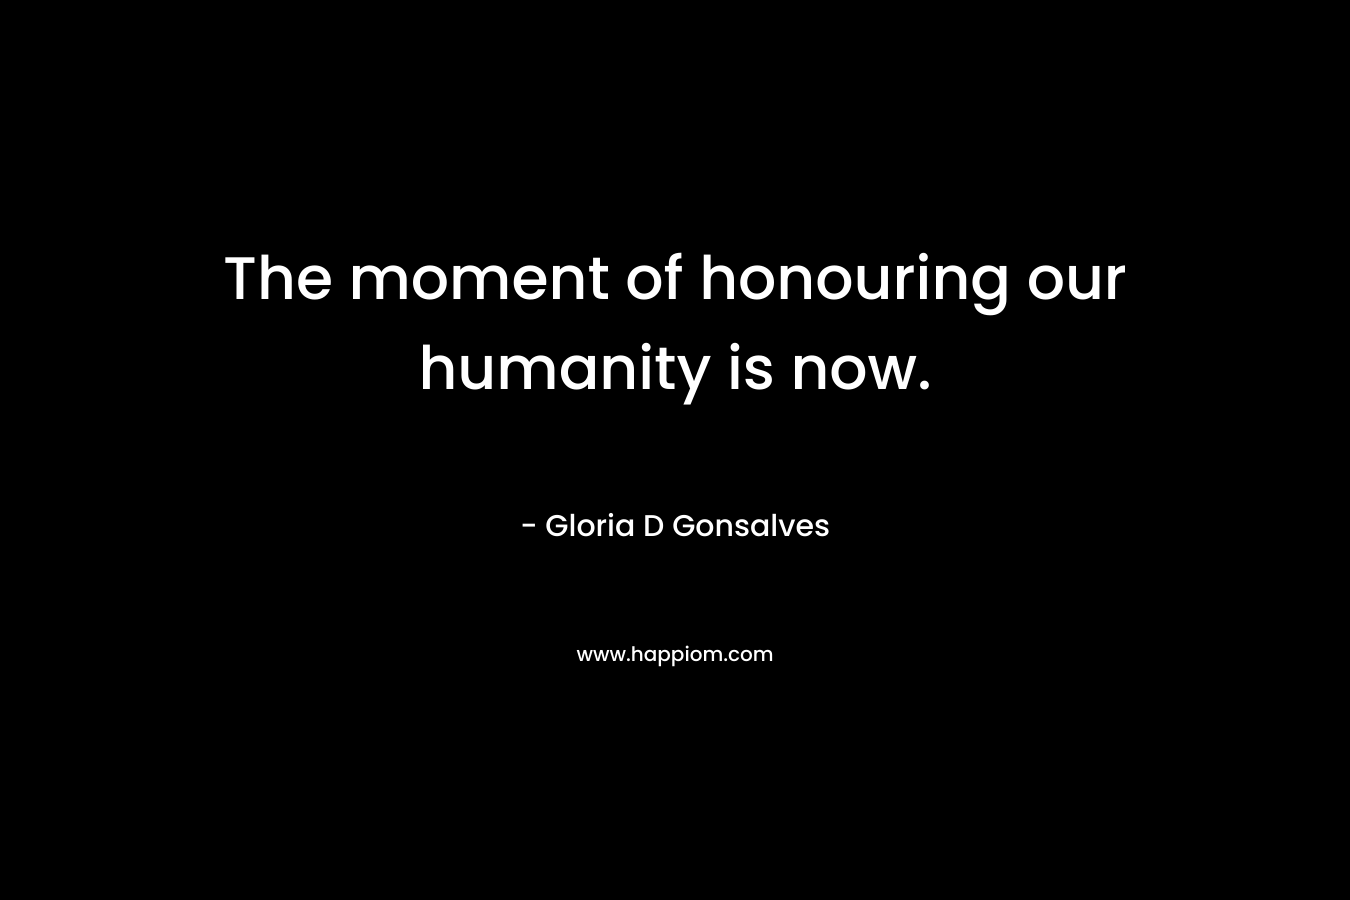 The moment of honouring our humanity is now. – Gloria D Gonsalves